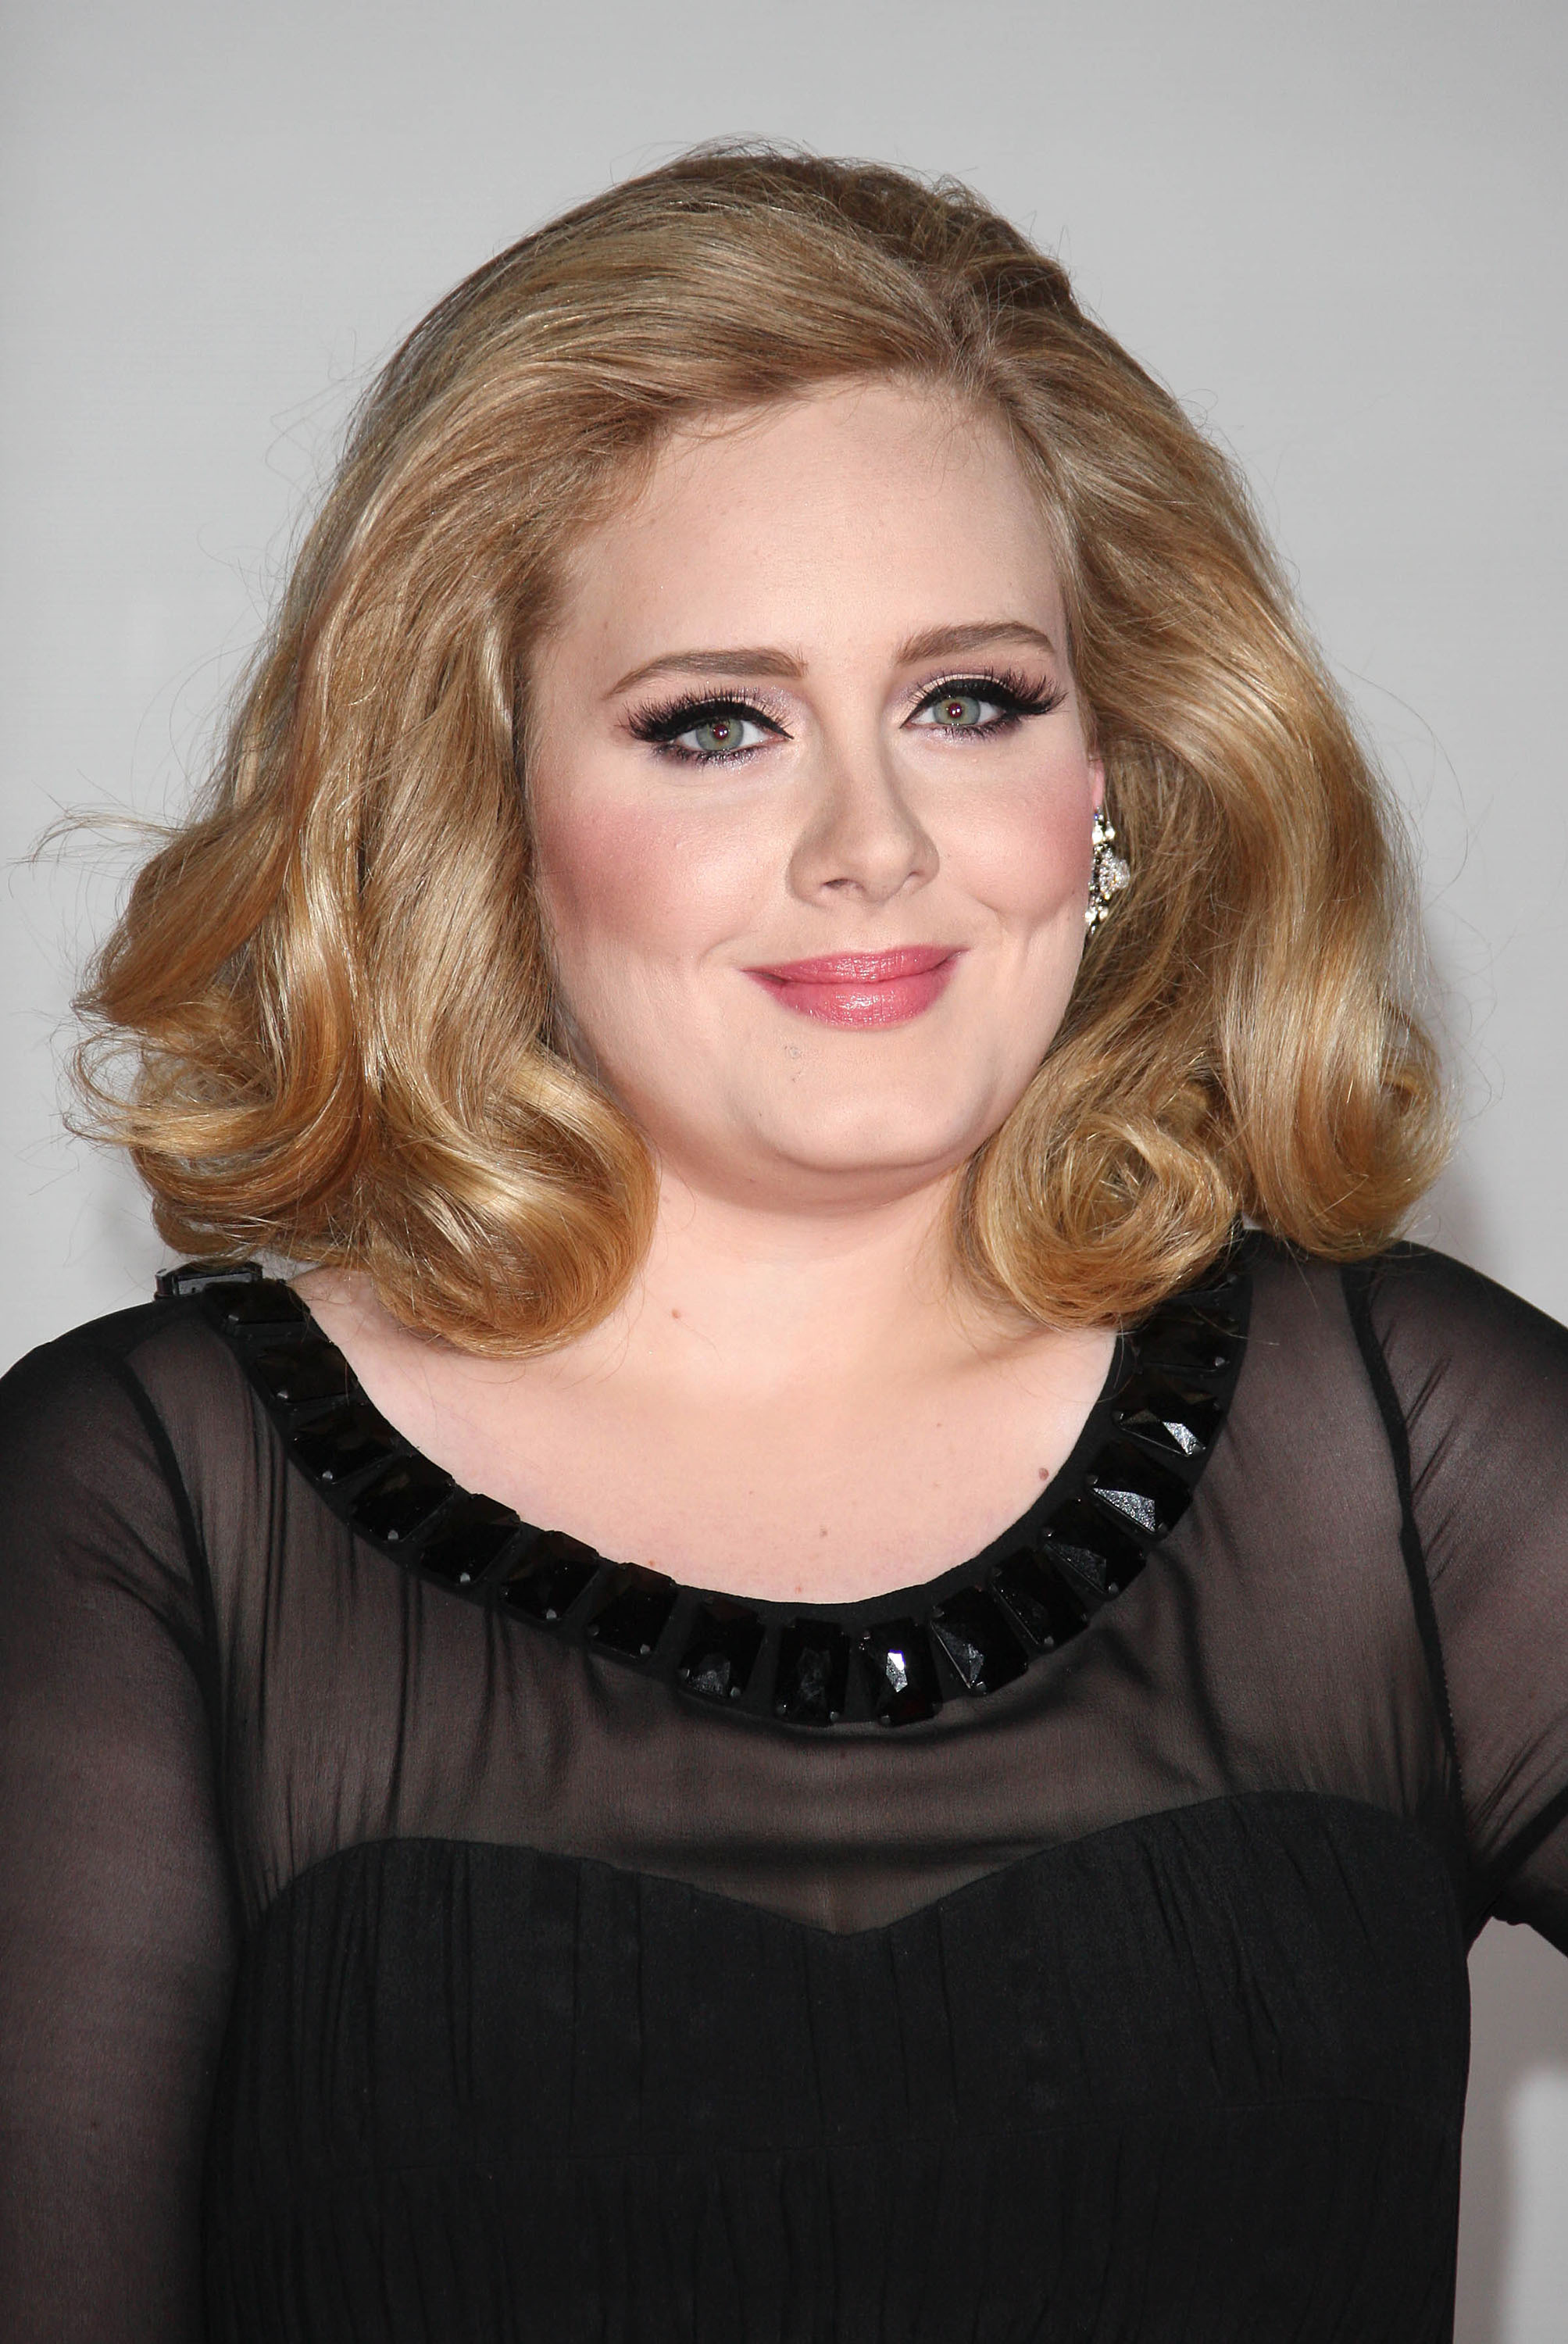 How hot could Adele be if she lost 40-50lbs? - Bodybuilding.com Forums